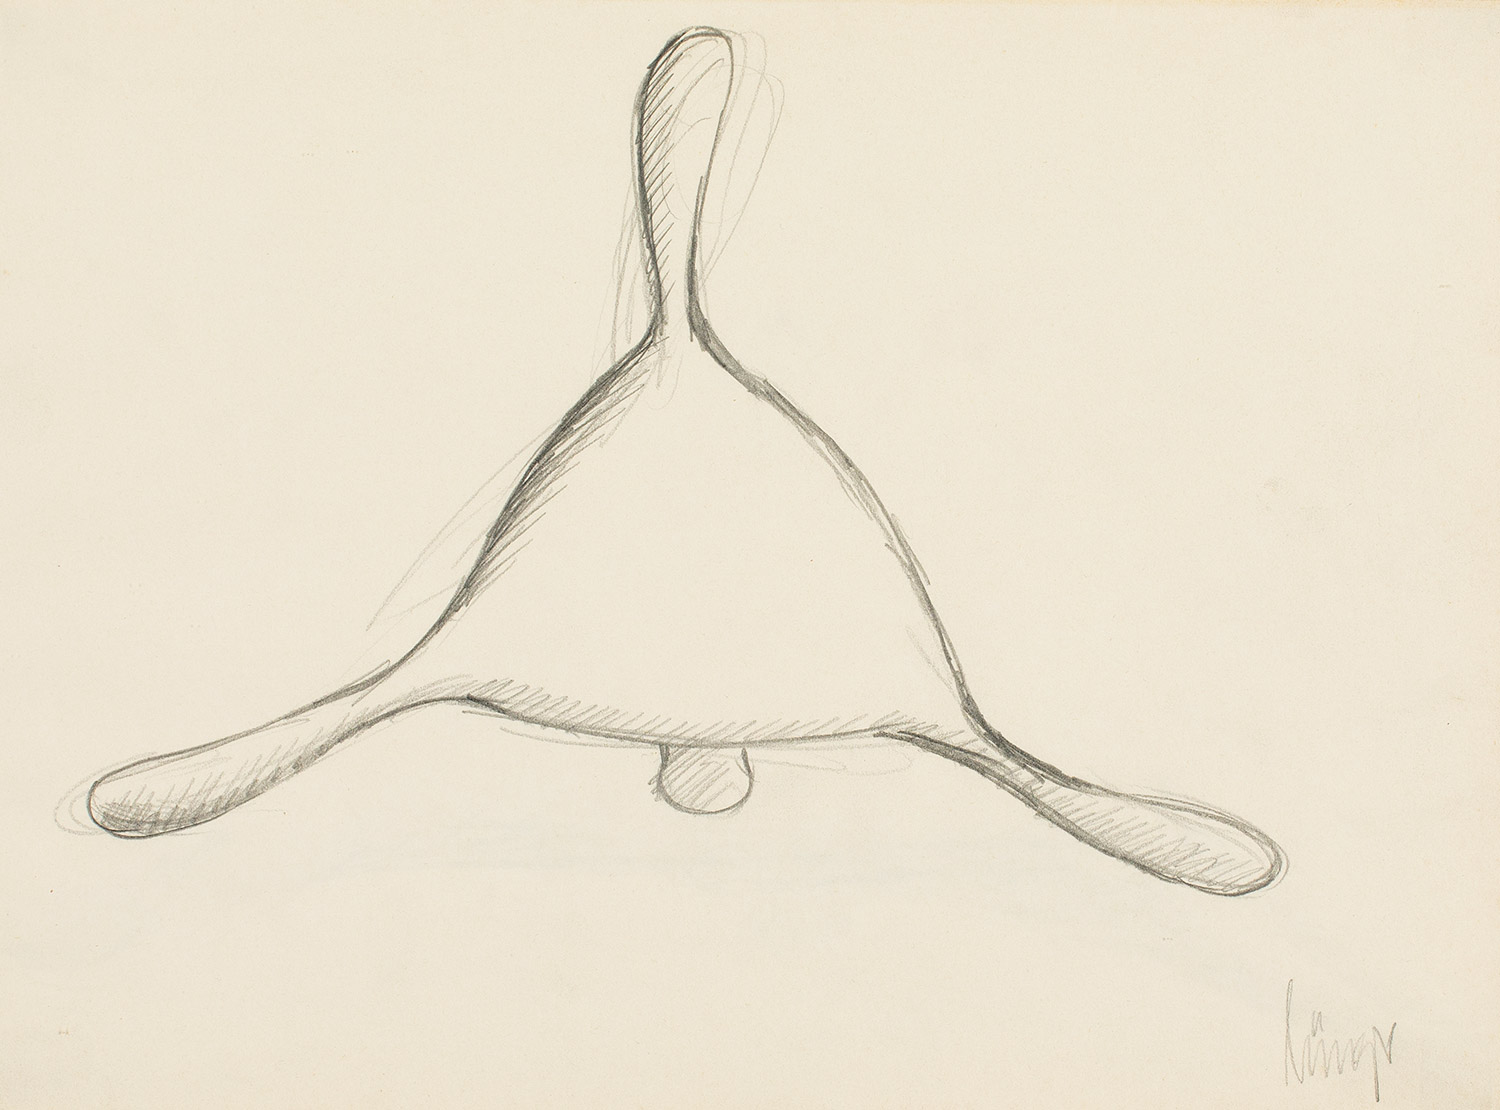 UNTITLED | pencil on paper | 2009